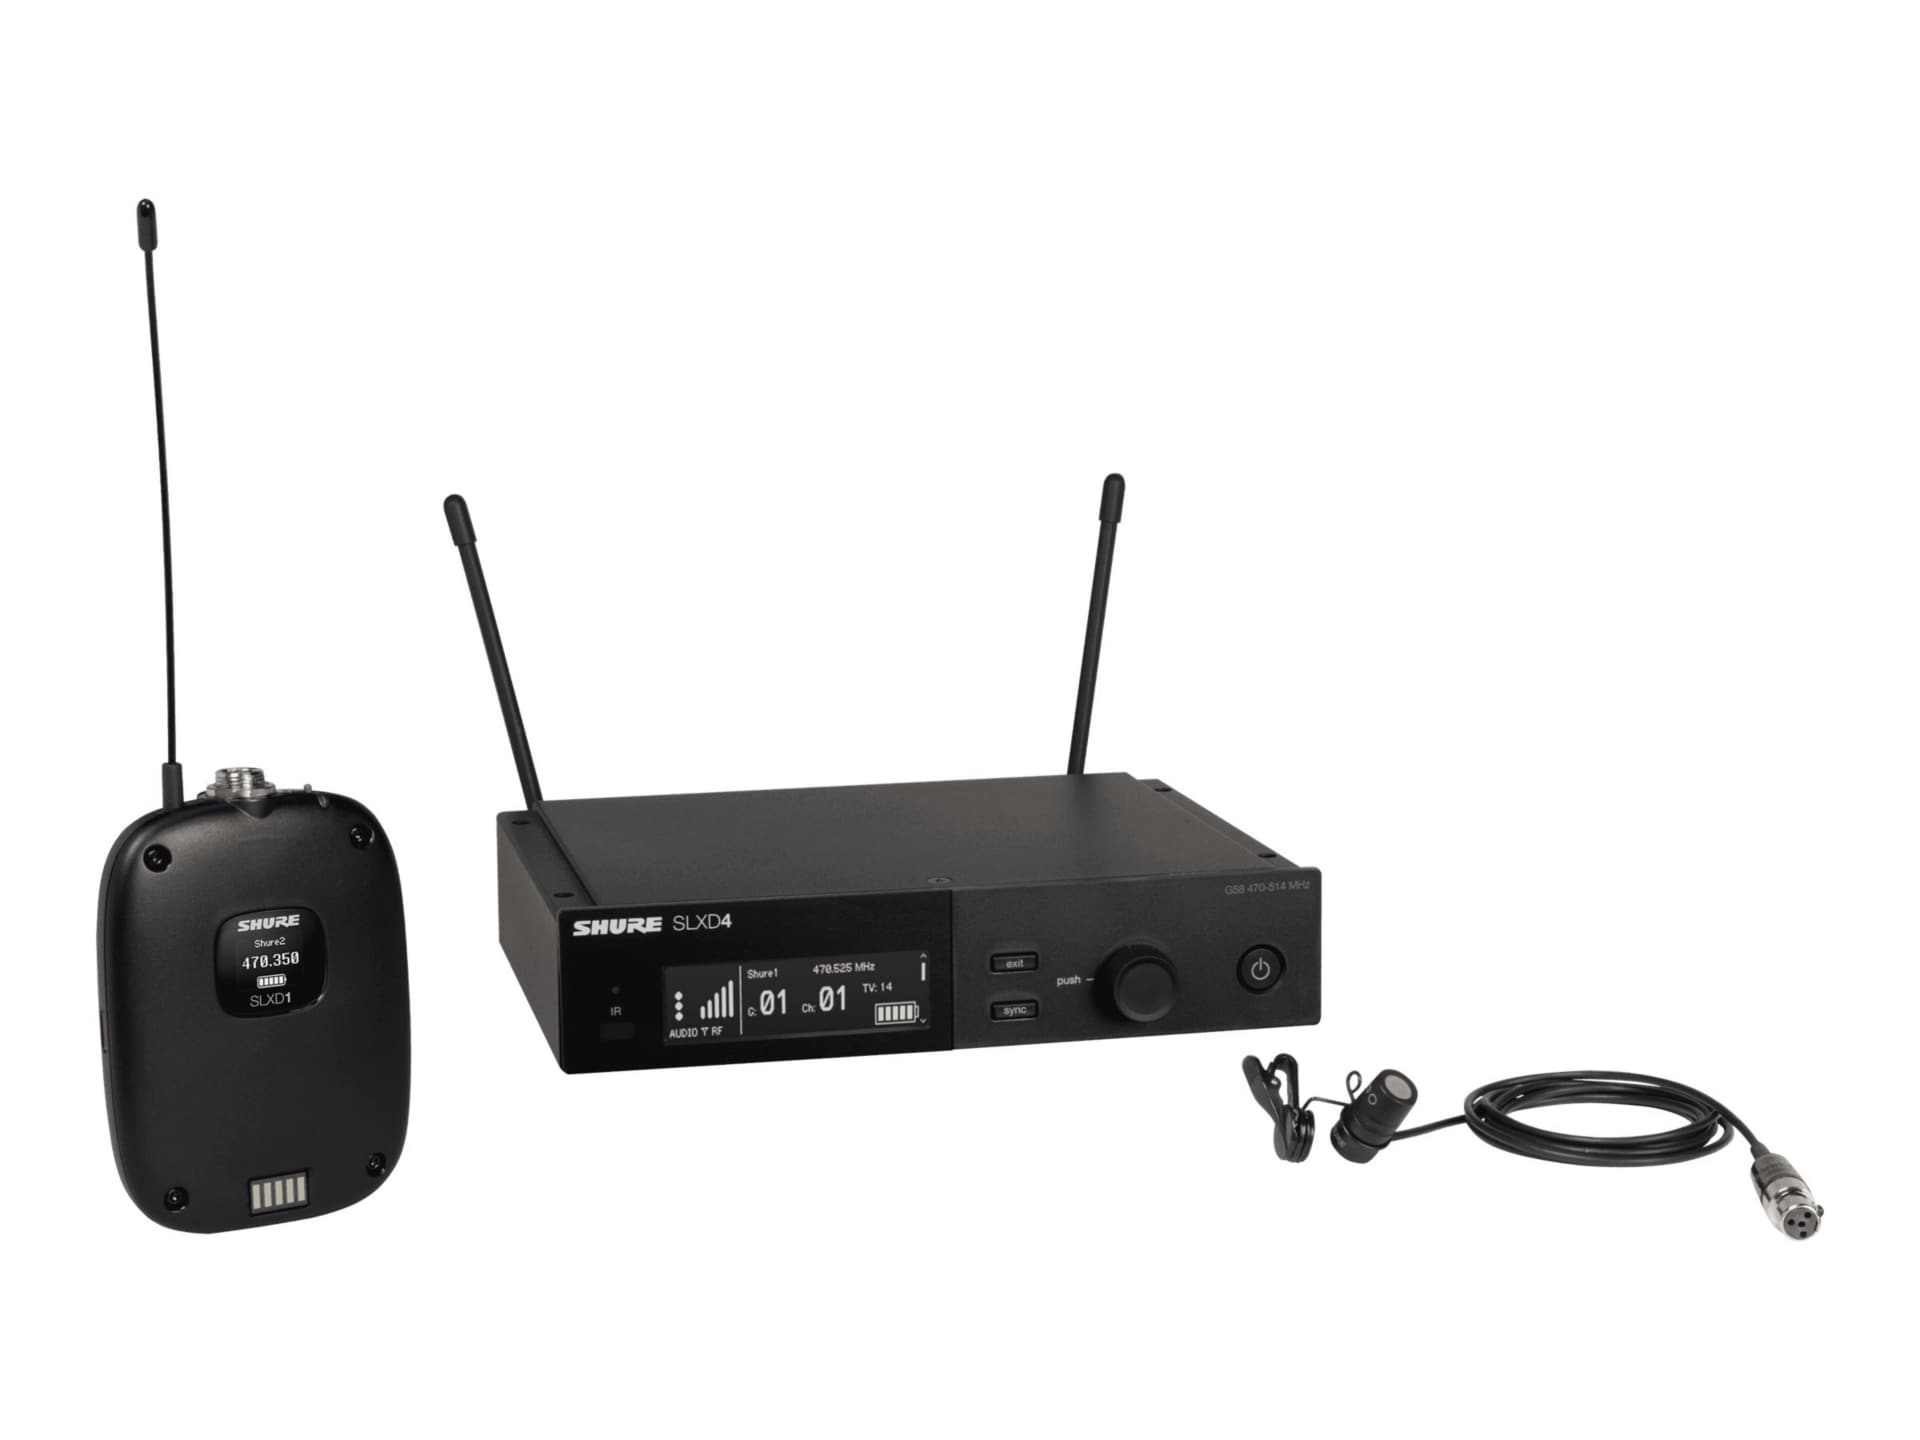 Shure SLX-D Wireless System SLXD14/85 - G58 Band - wireless microphone syst